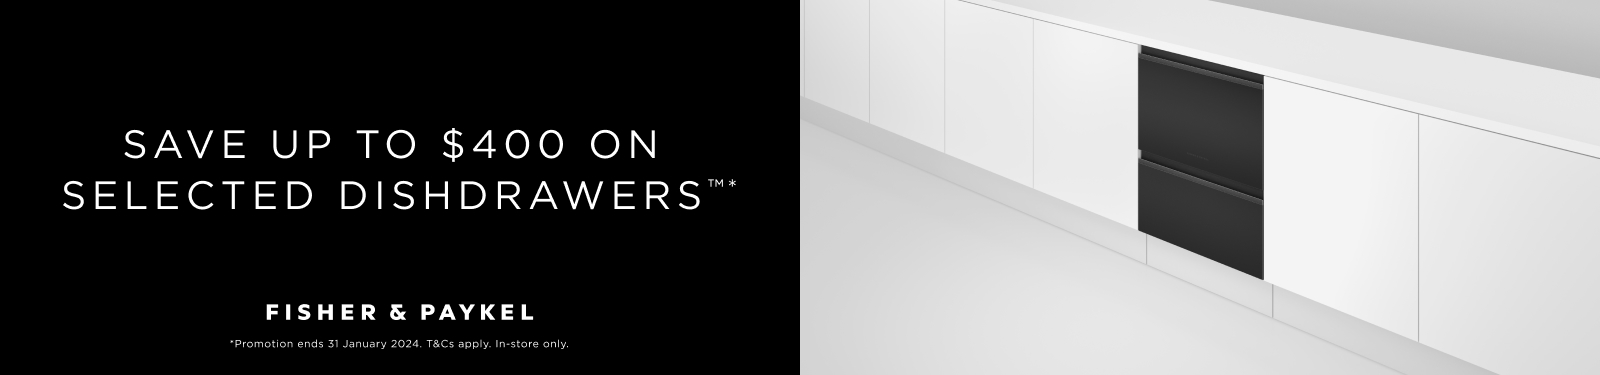 Save $400 On Selected Fisher & Paykel Dishdrawers